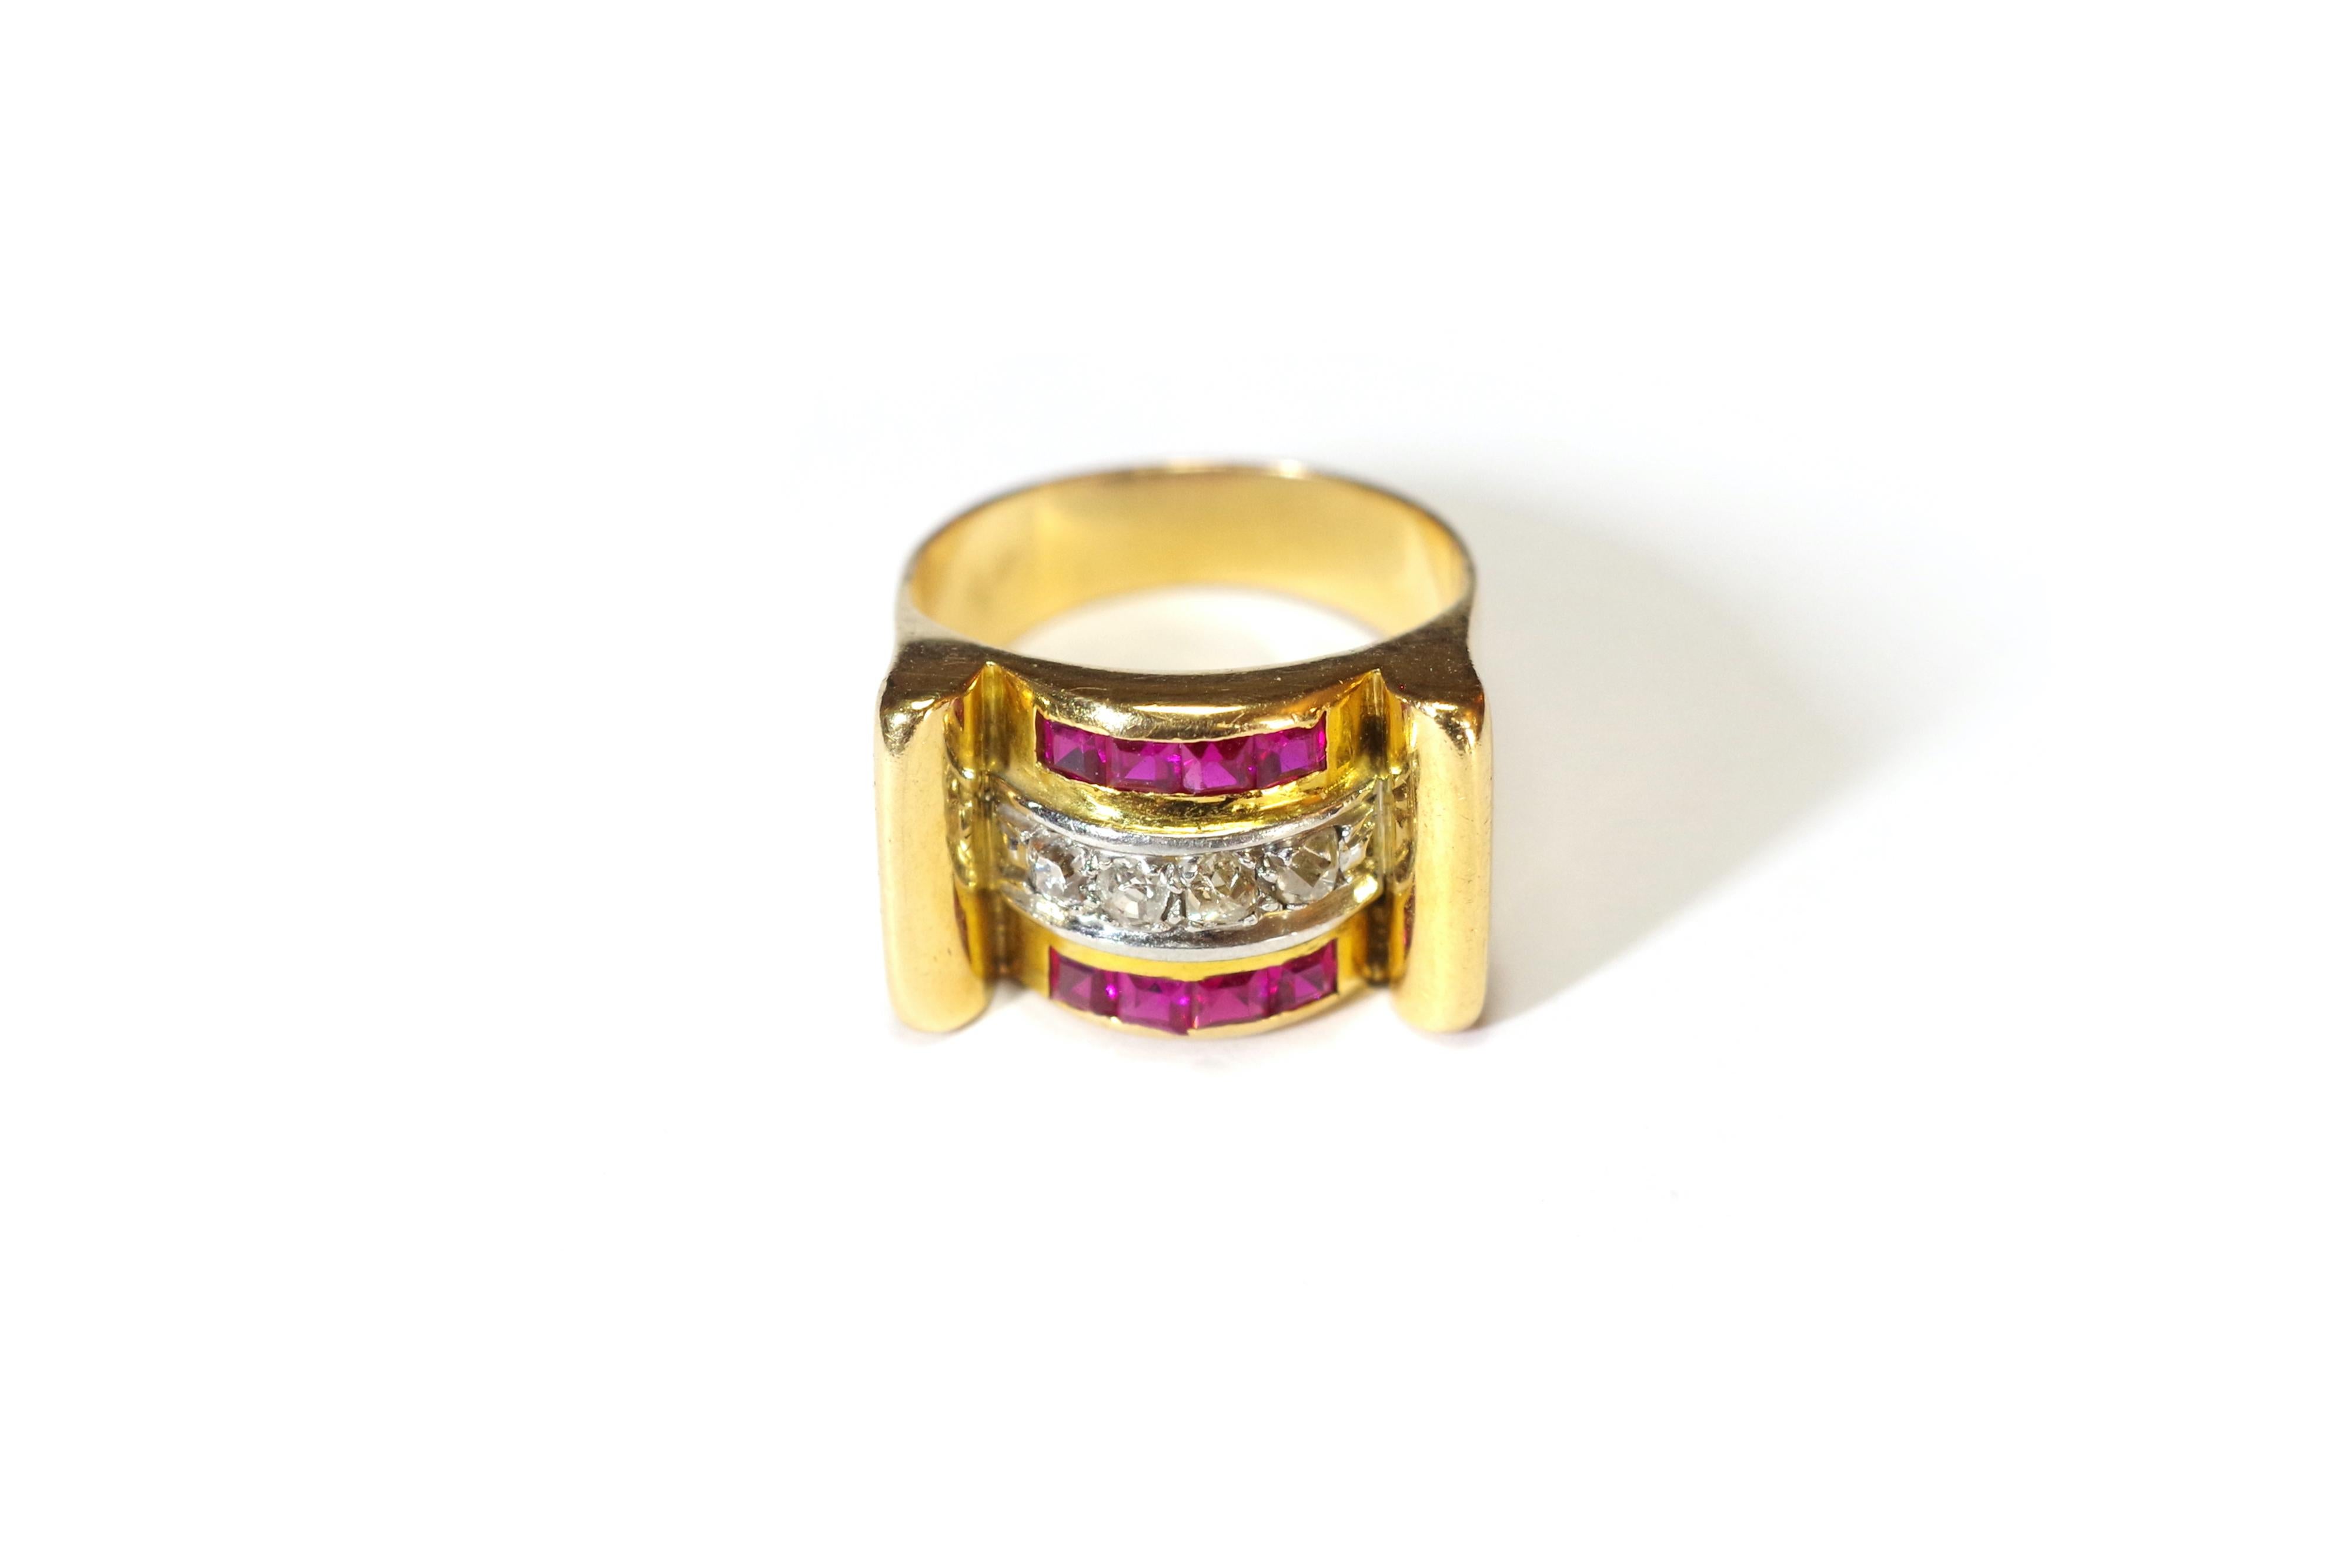 Small tank diamond ruby ring in yellow gold slightly pink, 18 karats. This small tank ring is set with a line of four old cut diamonds in a platinum setting. The diamonds are framed by two lines of four calibrated rubies.

French tank ring from the